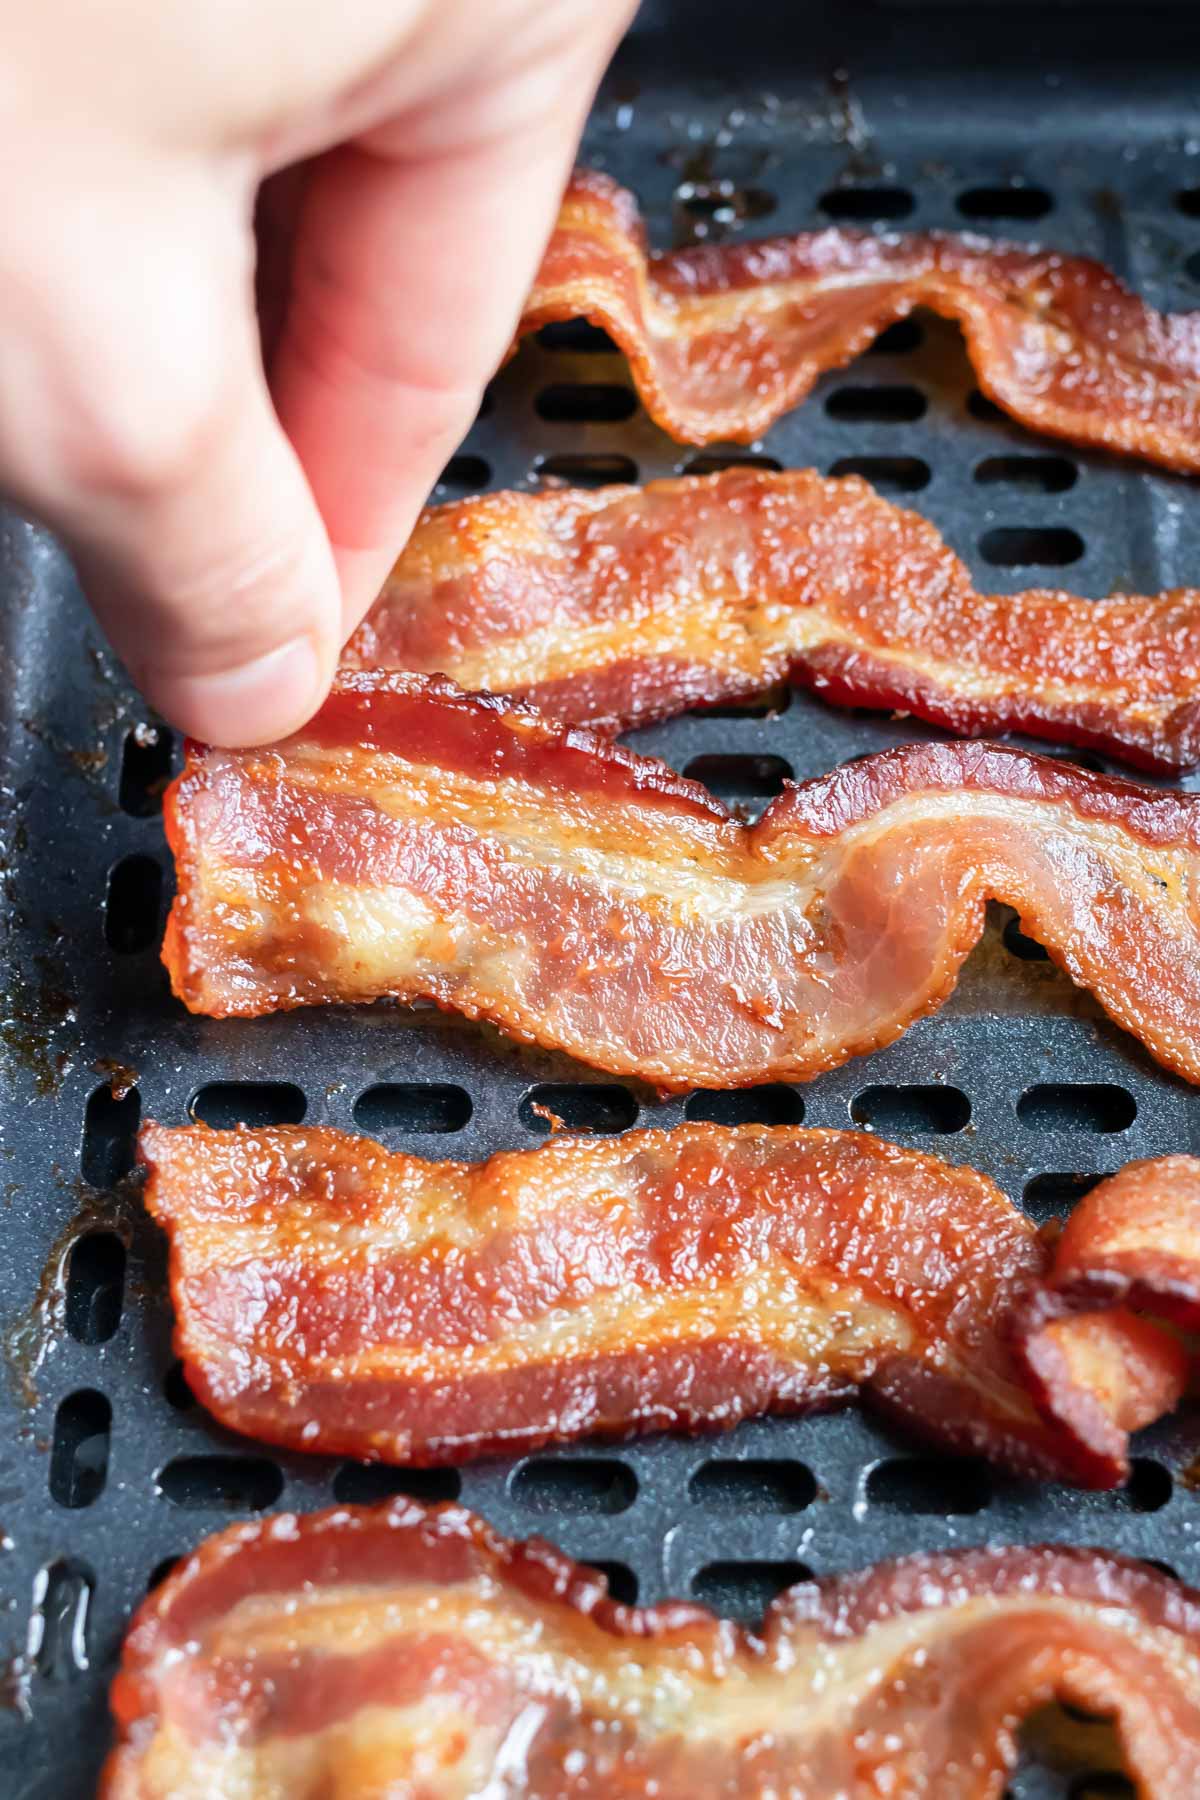 A slice of bacon is taken out of the air fryer after cooking.